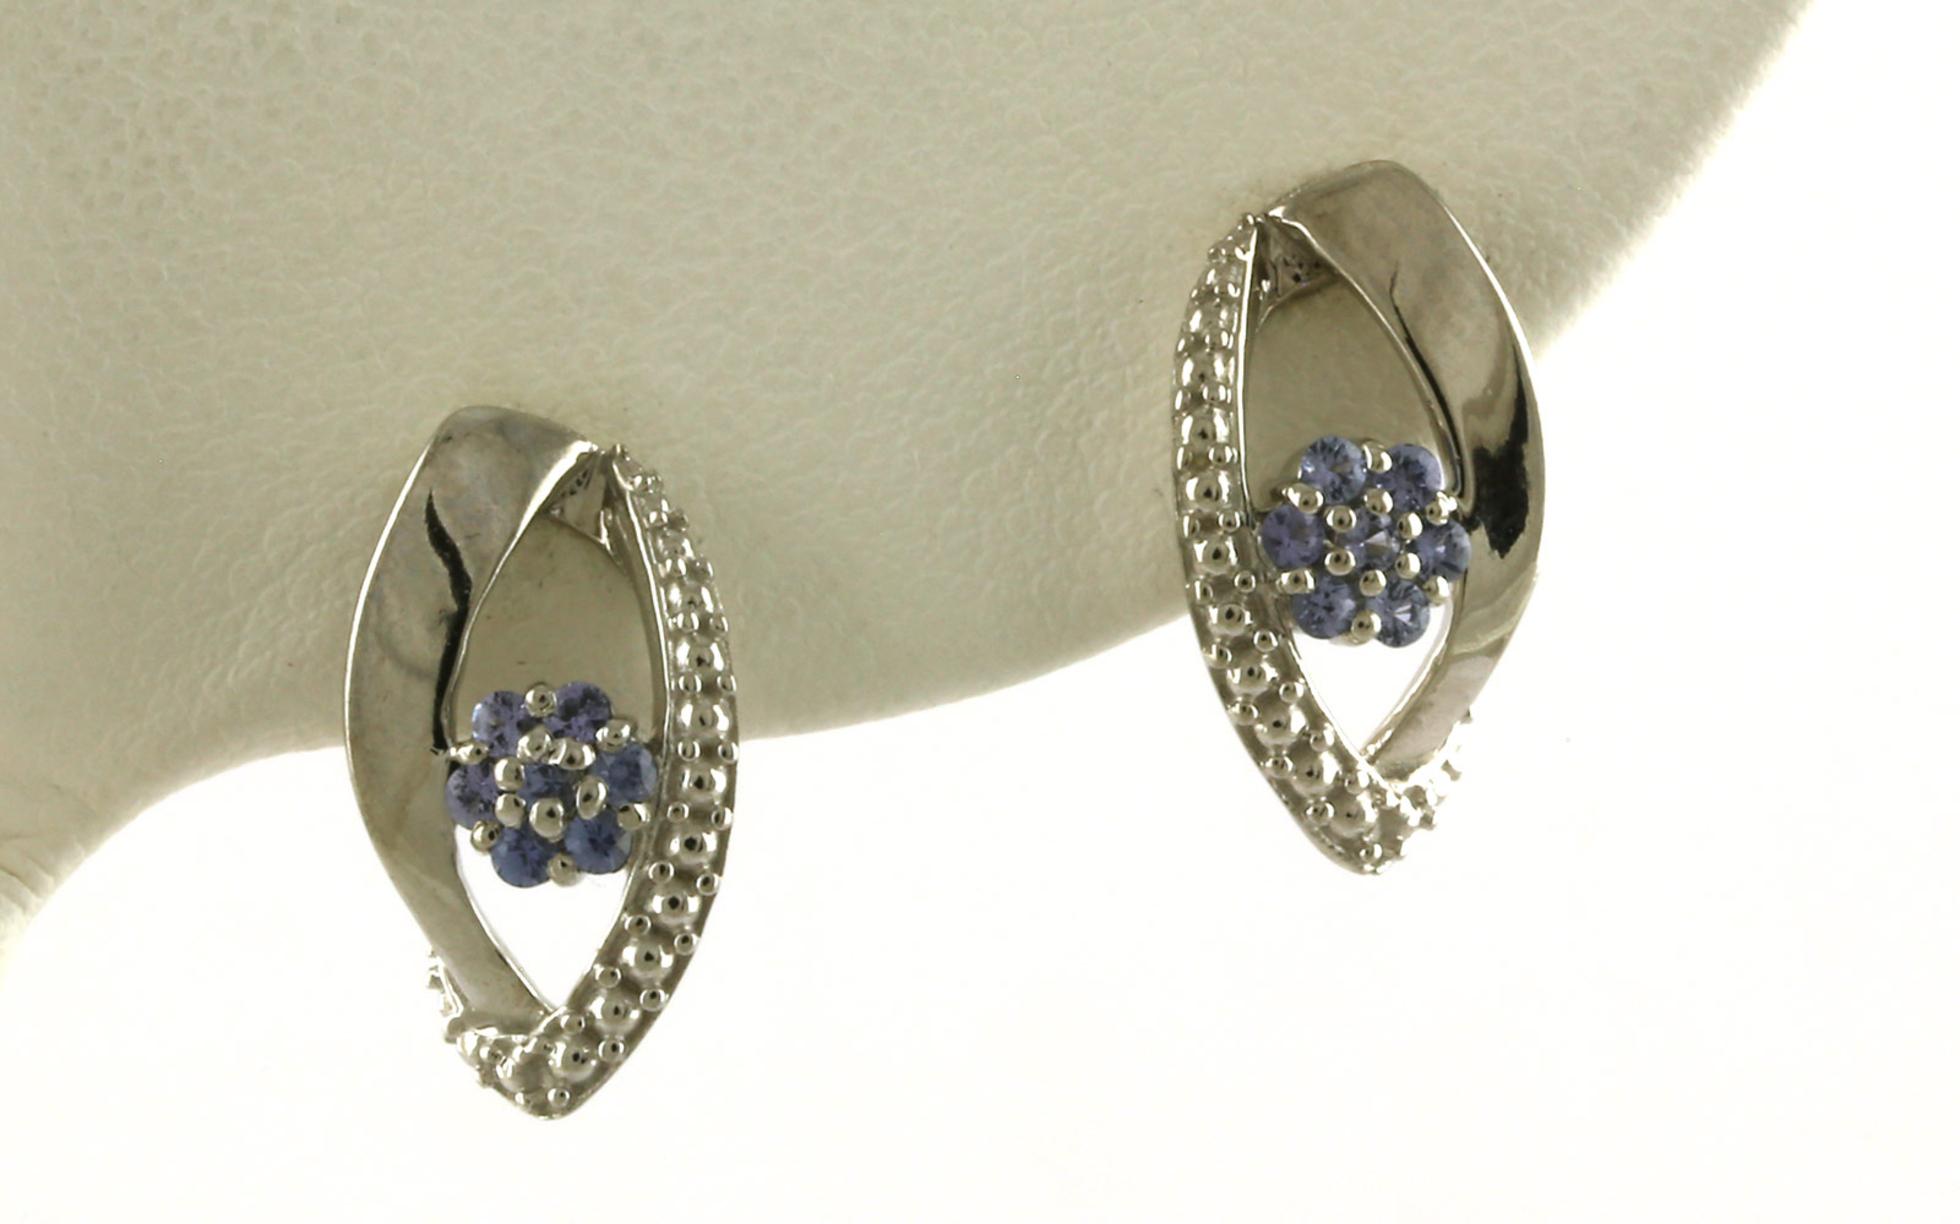 7-Stone Cluster Montana Yogo Sapphire Earrings with Bead Details in Sterling Silver